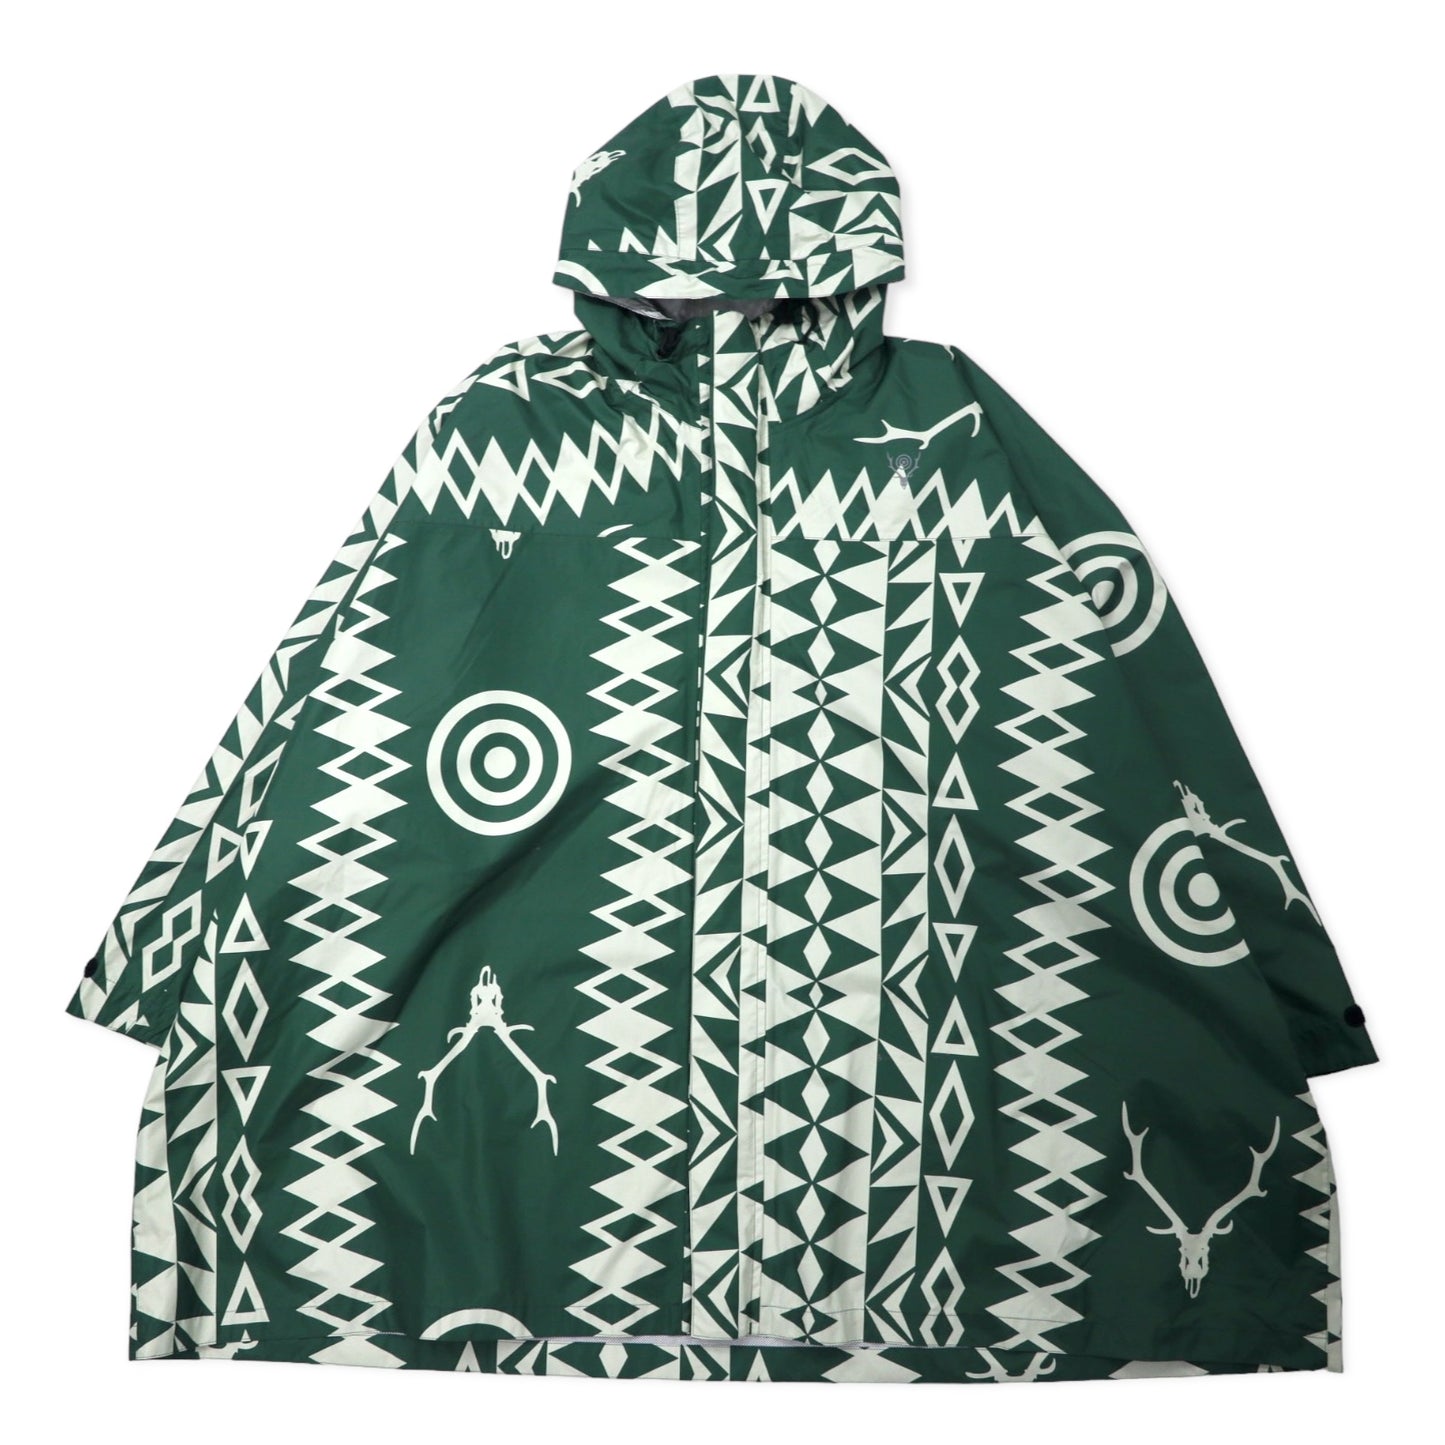 SOUTH2 WEST8 Poncho Mountain HOODIE M Khaki Patterned Polyester ...